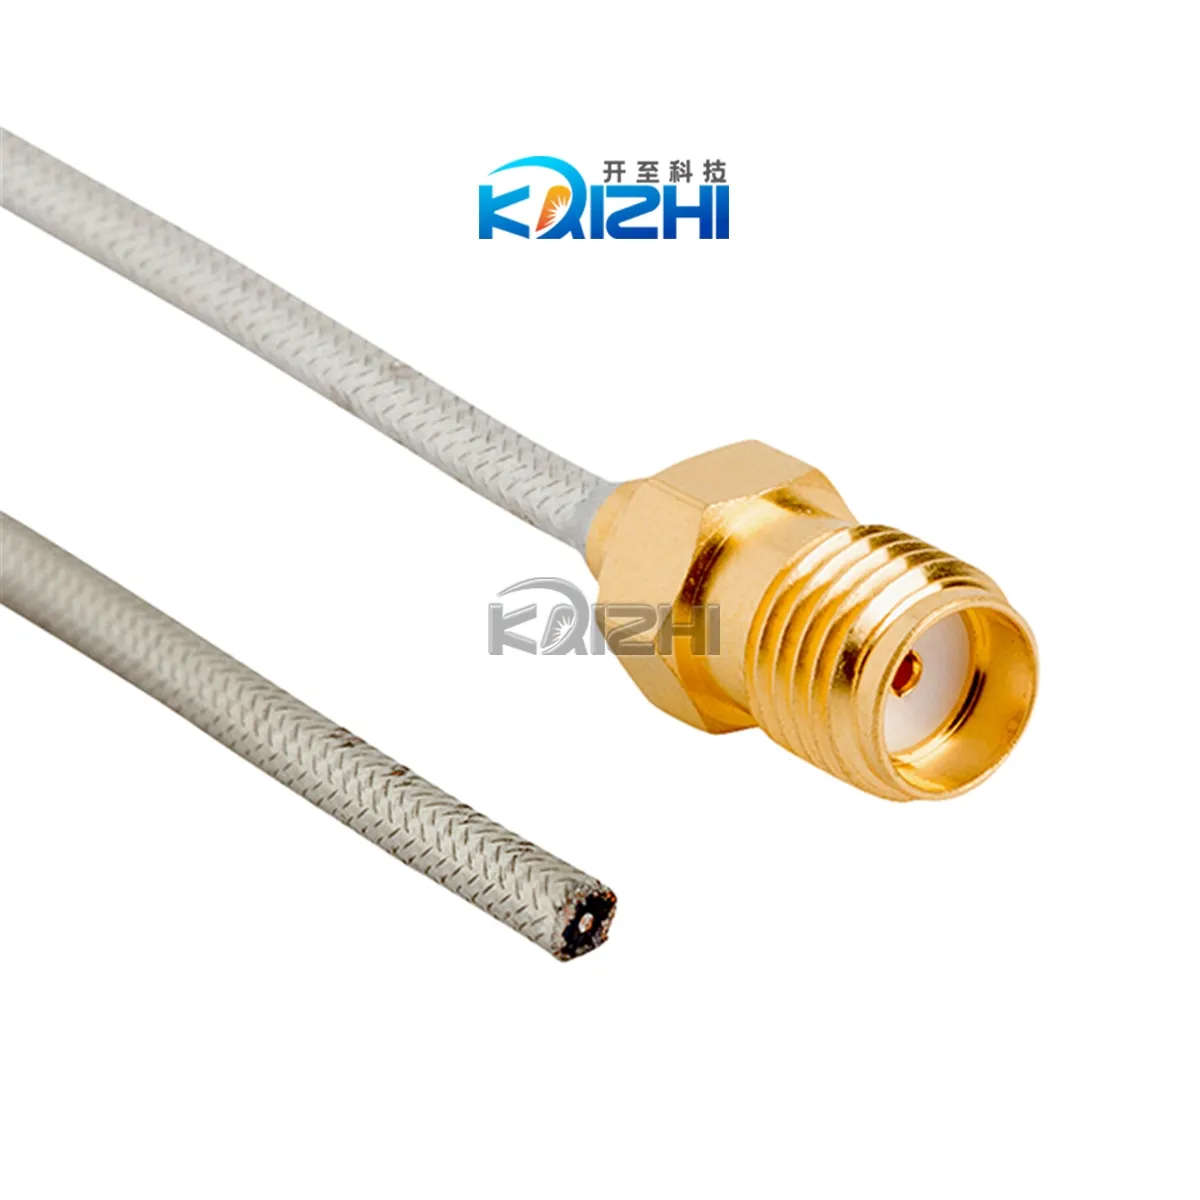 IN STOCK ORIGINAL BRAND RF CABLE COAXIAL SMA JACK 4" 095-902-462-004